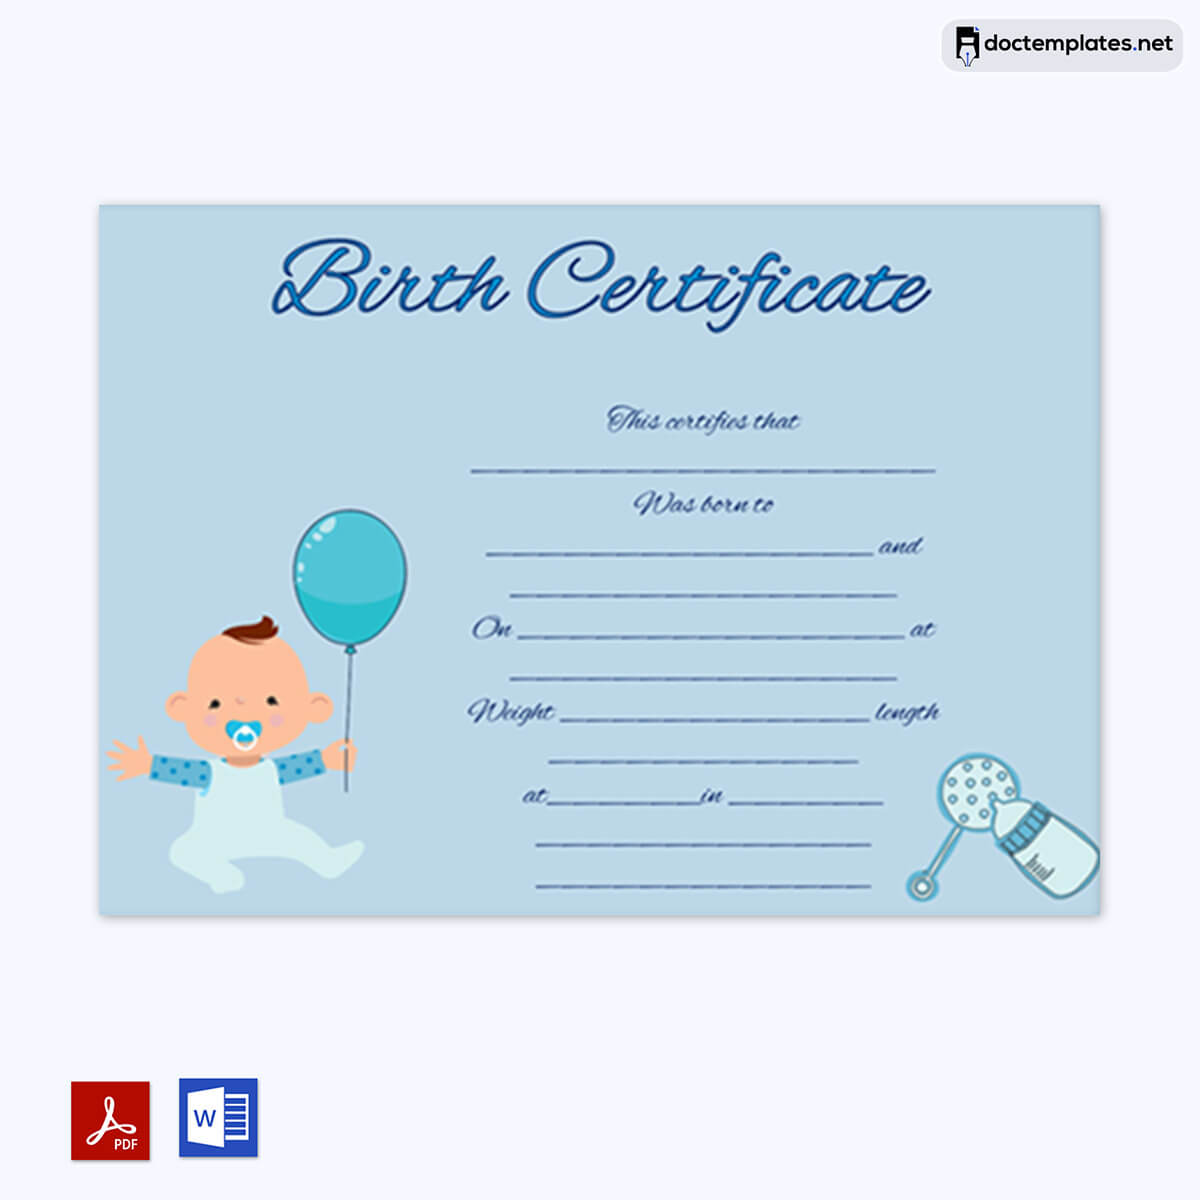 Image of Fillable birth certificate template
Fillable birth certificate template
06